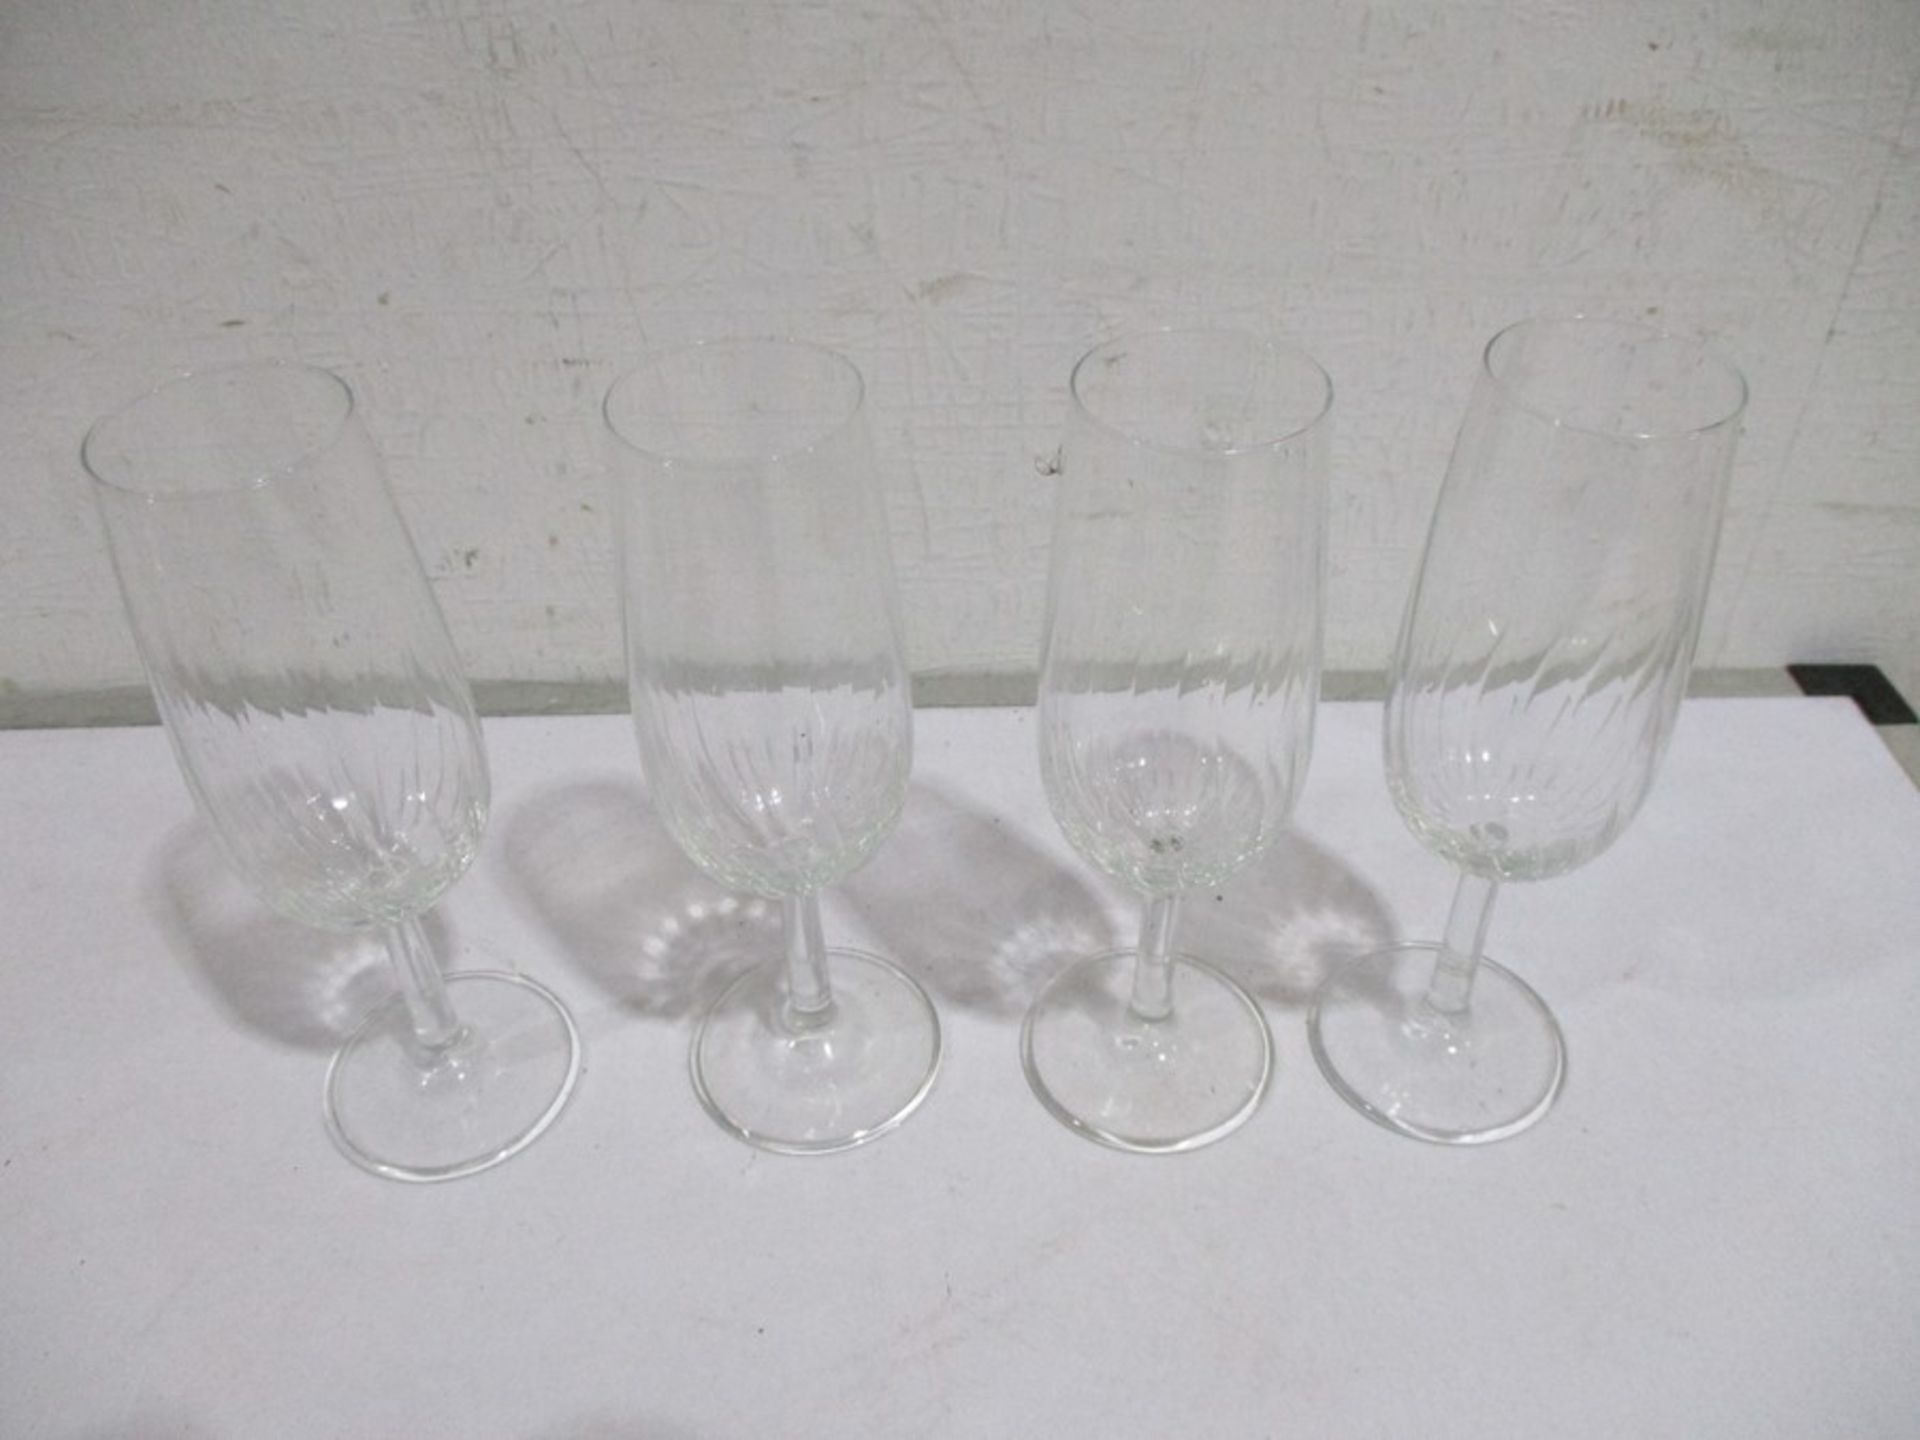 A large quantity of glassware in two boxes including tumblers, martini glasses etc. - Image 10 of 19